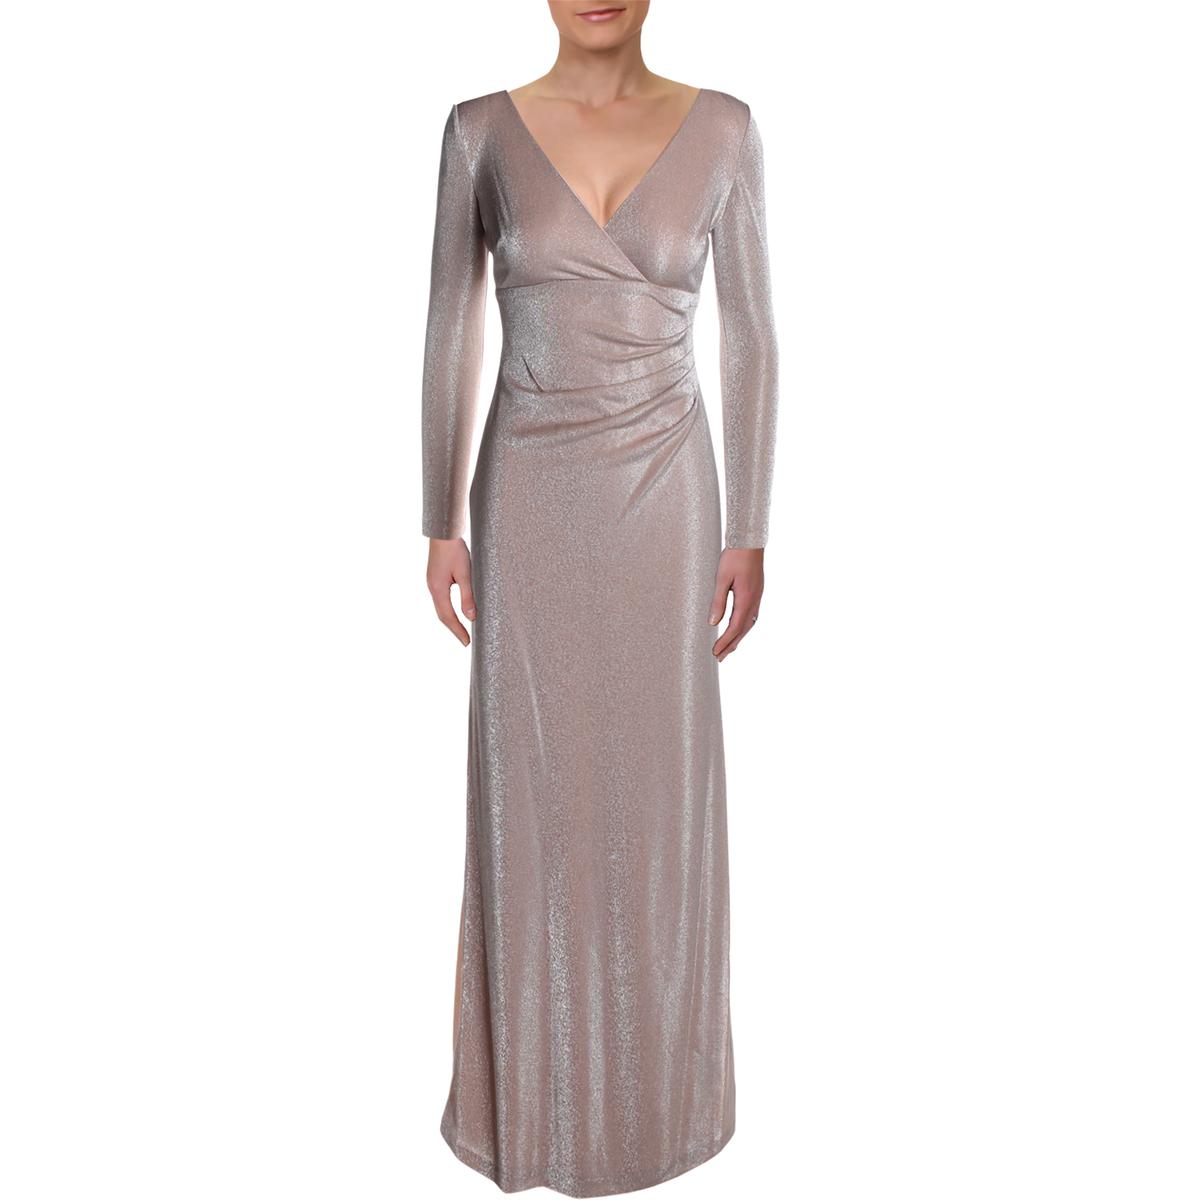 Vince Camuto Womens Pink Shimmer Surplice Formal Evening Dress Gown 14 ...